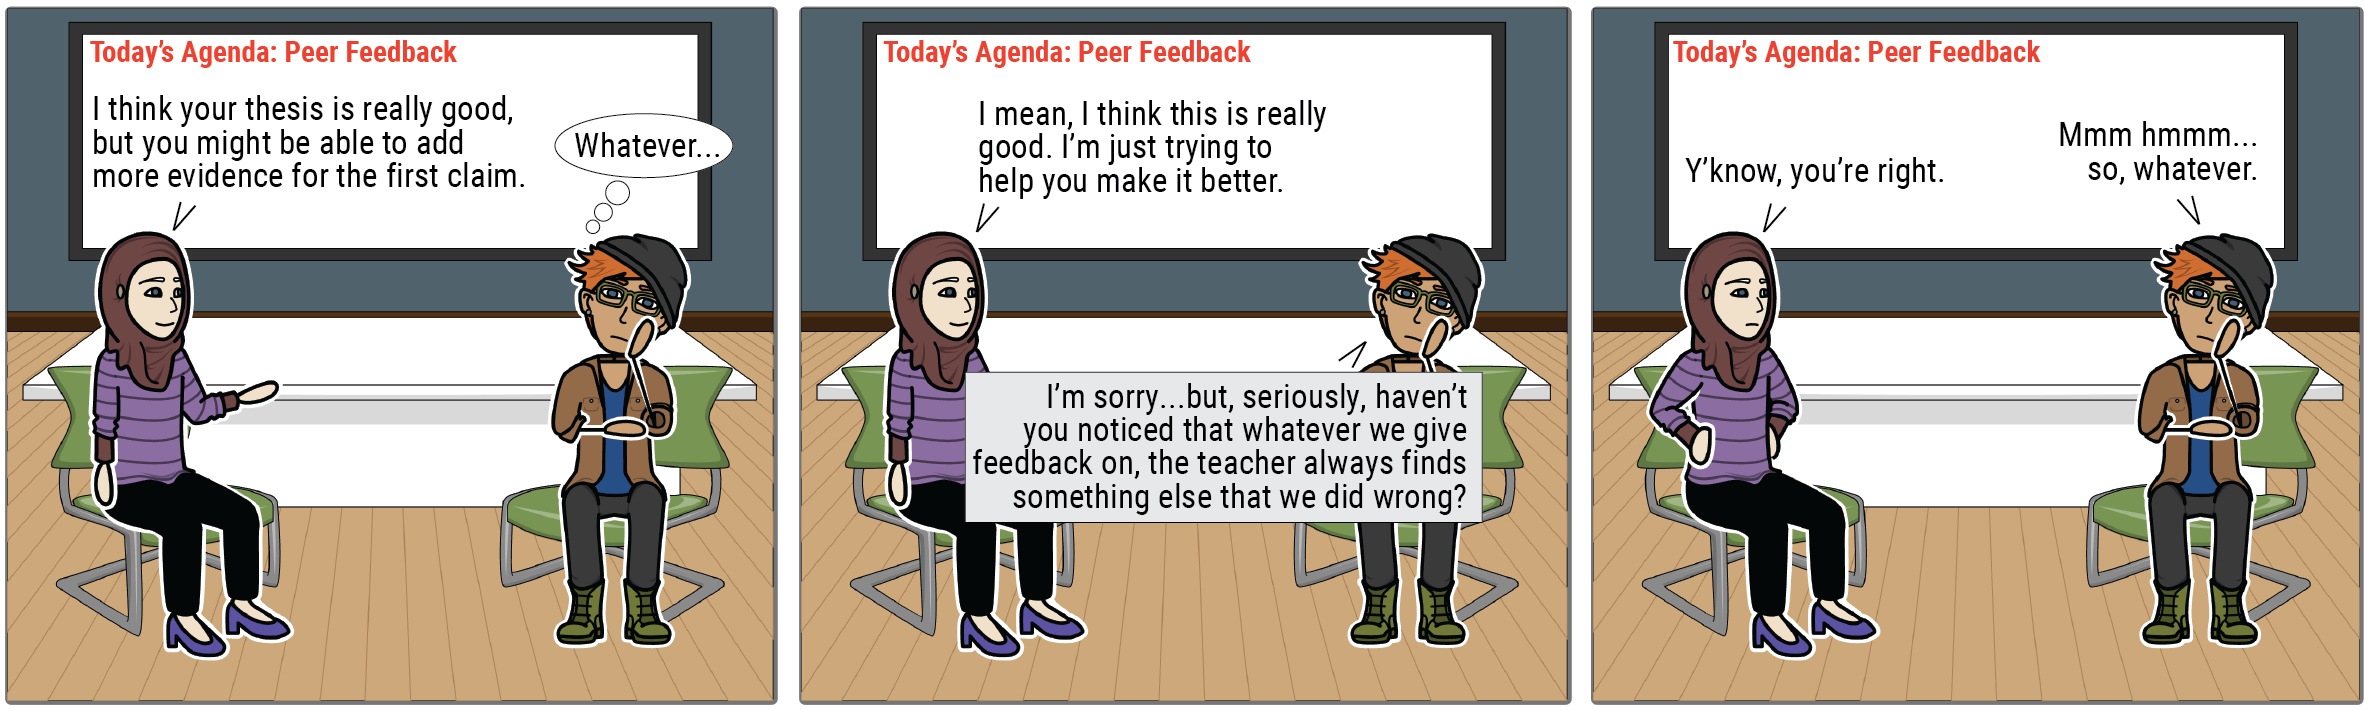 A comic strip shows two students giving peer feedback. Student 1: "I think your thesis is really good, but you might be able to add more evidence for the first claim." Student 2 thinks, "Whatever..." Student 1: "I mean, this is really good, I'm just trying to help you make it better." Student 2: "I'm sorry ... but seriously, haven't you noticed that whatever we give feedback on, the teacher always finds something else that we did wrong?" Student 1: "Y'know, you're right." Student 2: "Mmmhmm, so, whatever."